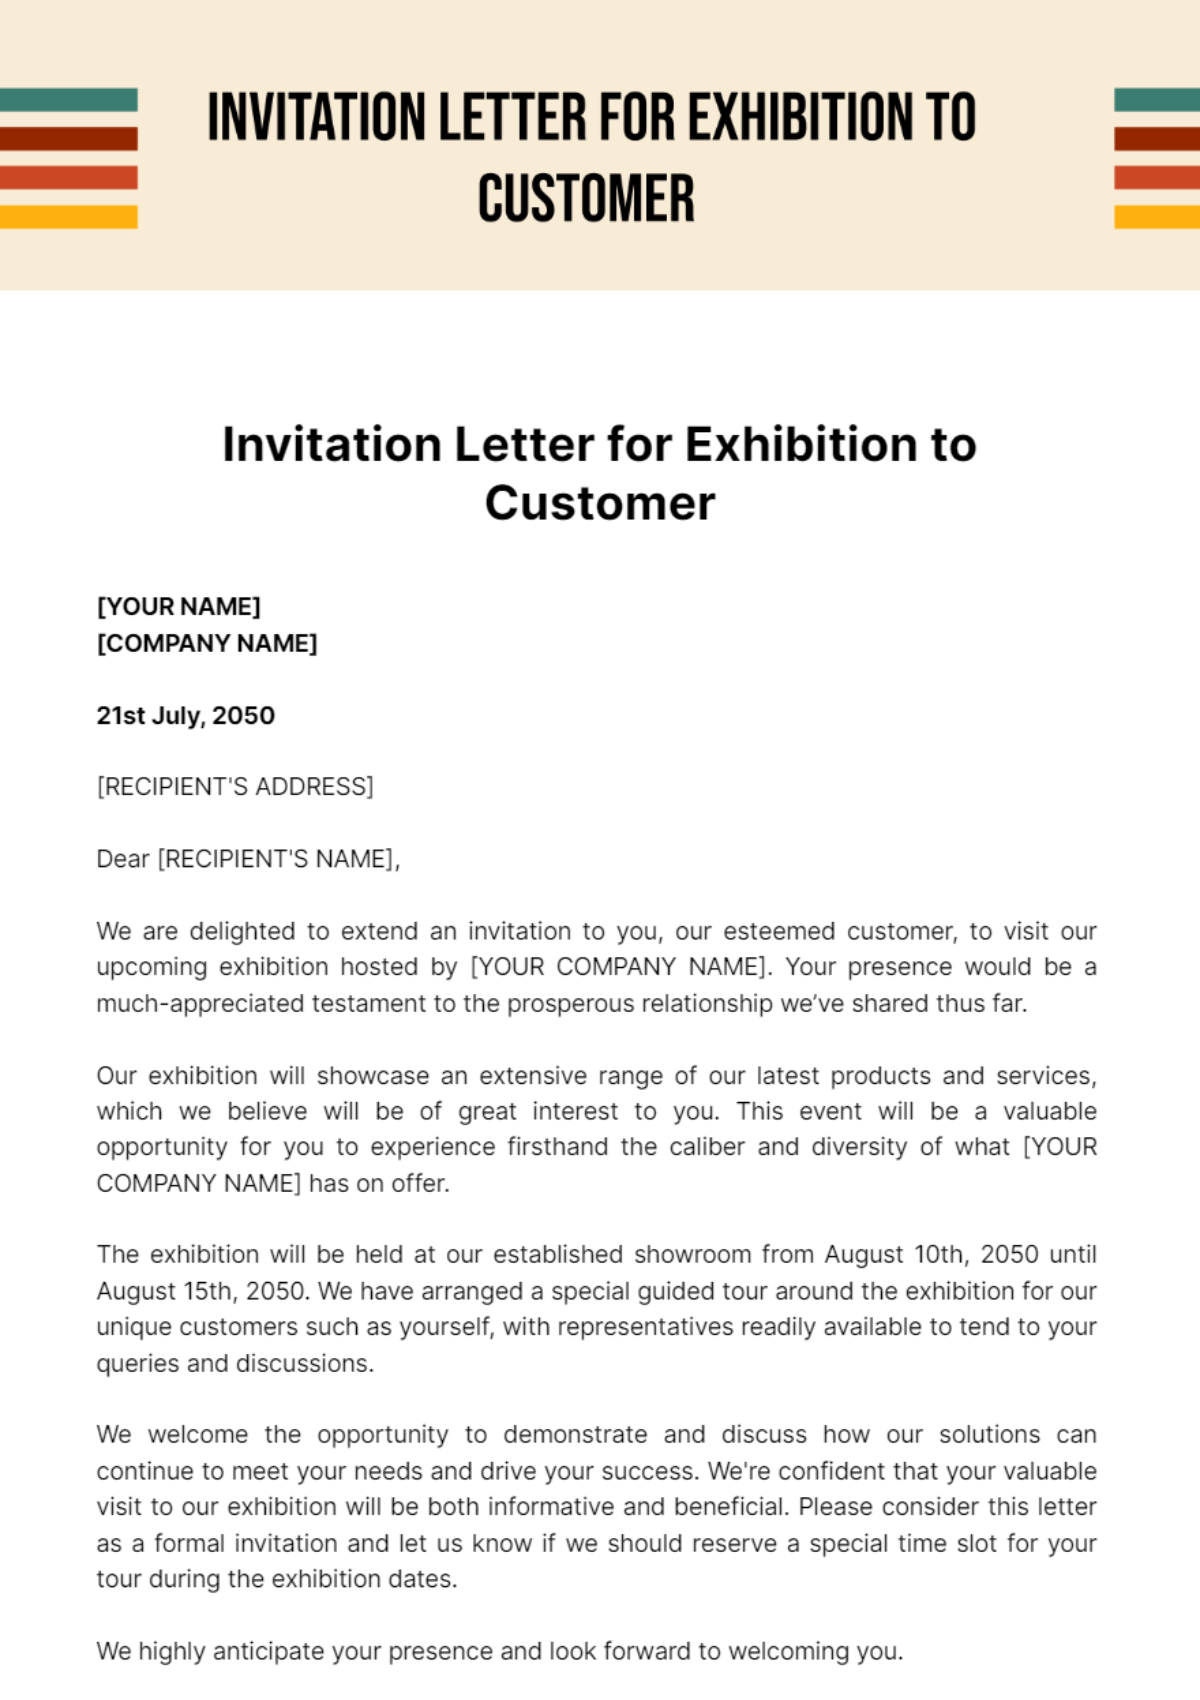 Invitation Letter for Exhibition to Customer Template